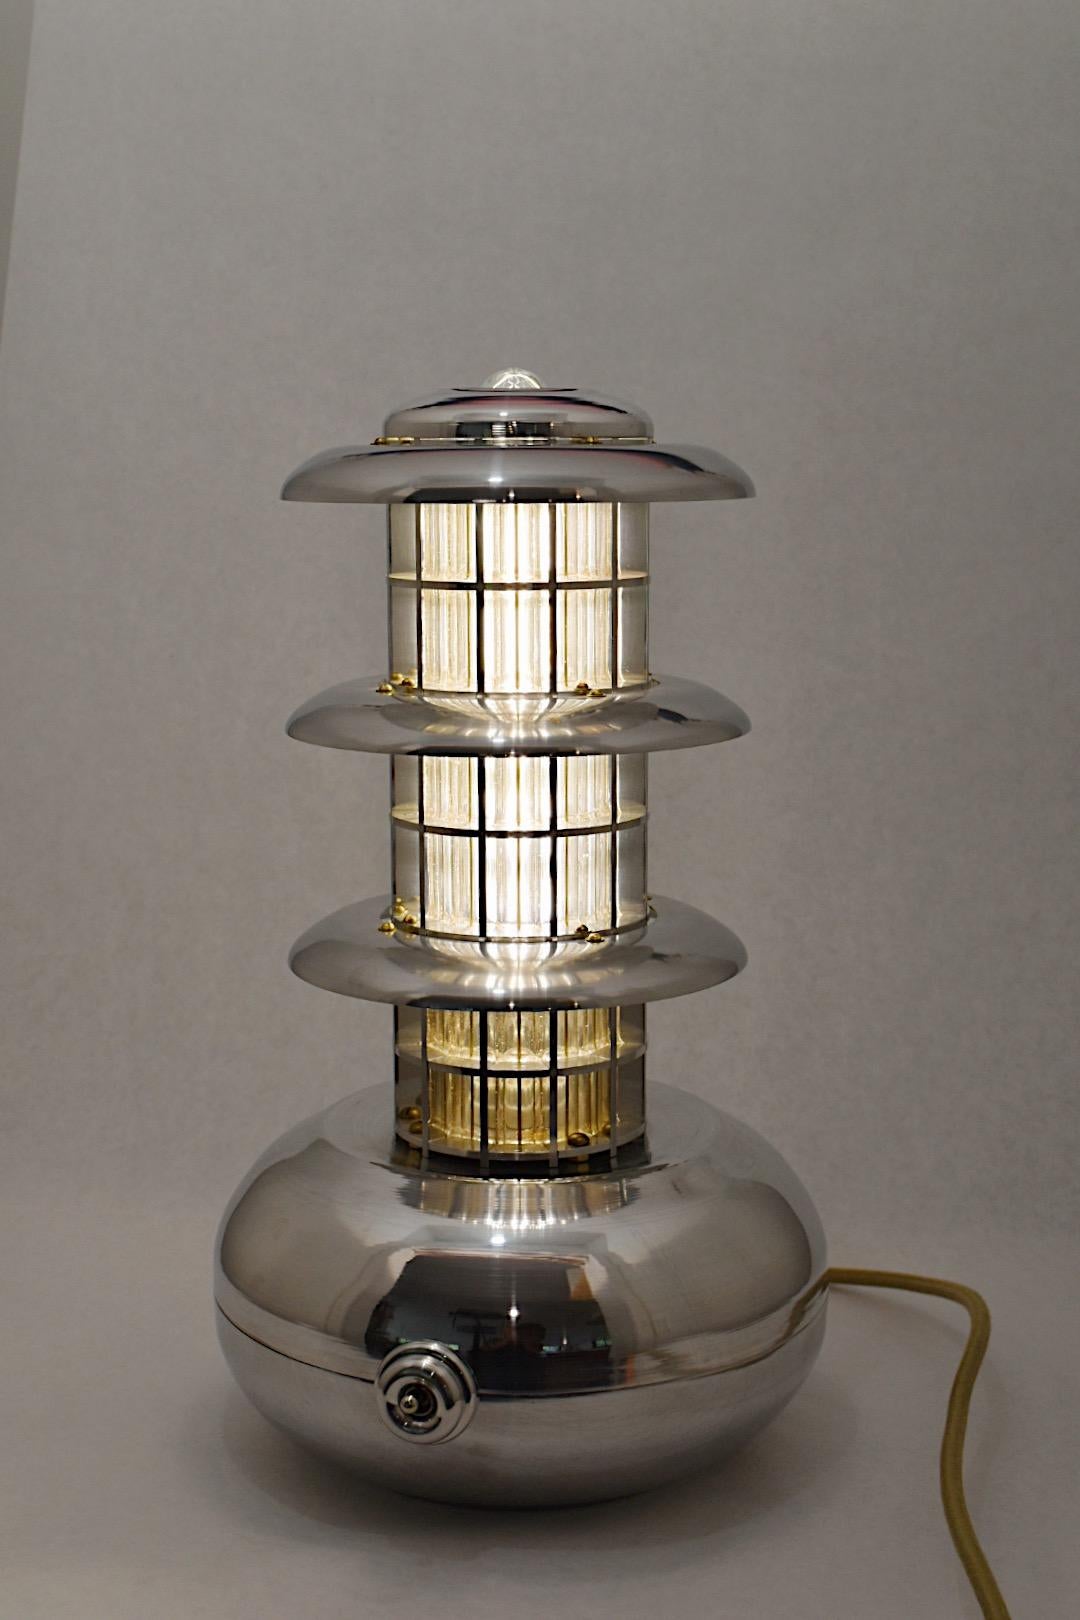 Pagoda Lamp Model 1 is one half of a pair of lamps designed and fabricated during 2021. The inspiration is the Peace Pagoda in San Francisco's Japantown neighborhood designed by Yoshiro Taniguchi, constructed in the 1960s. 
The center column of the